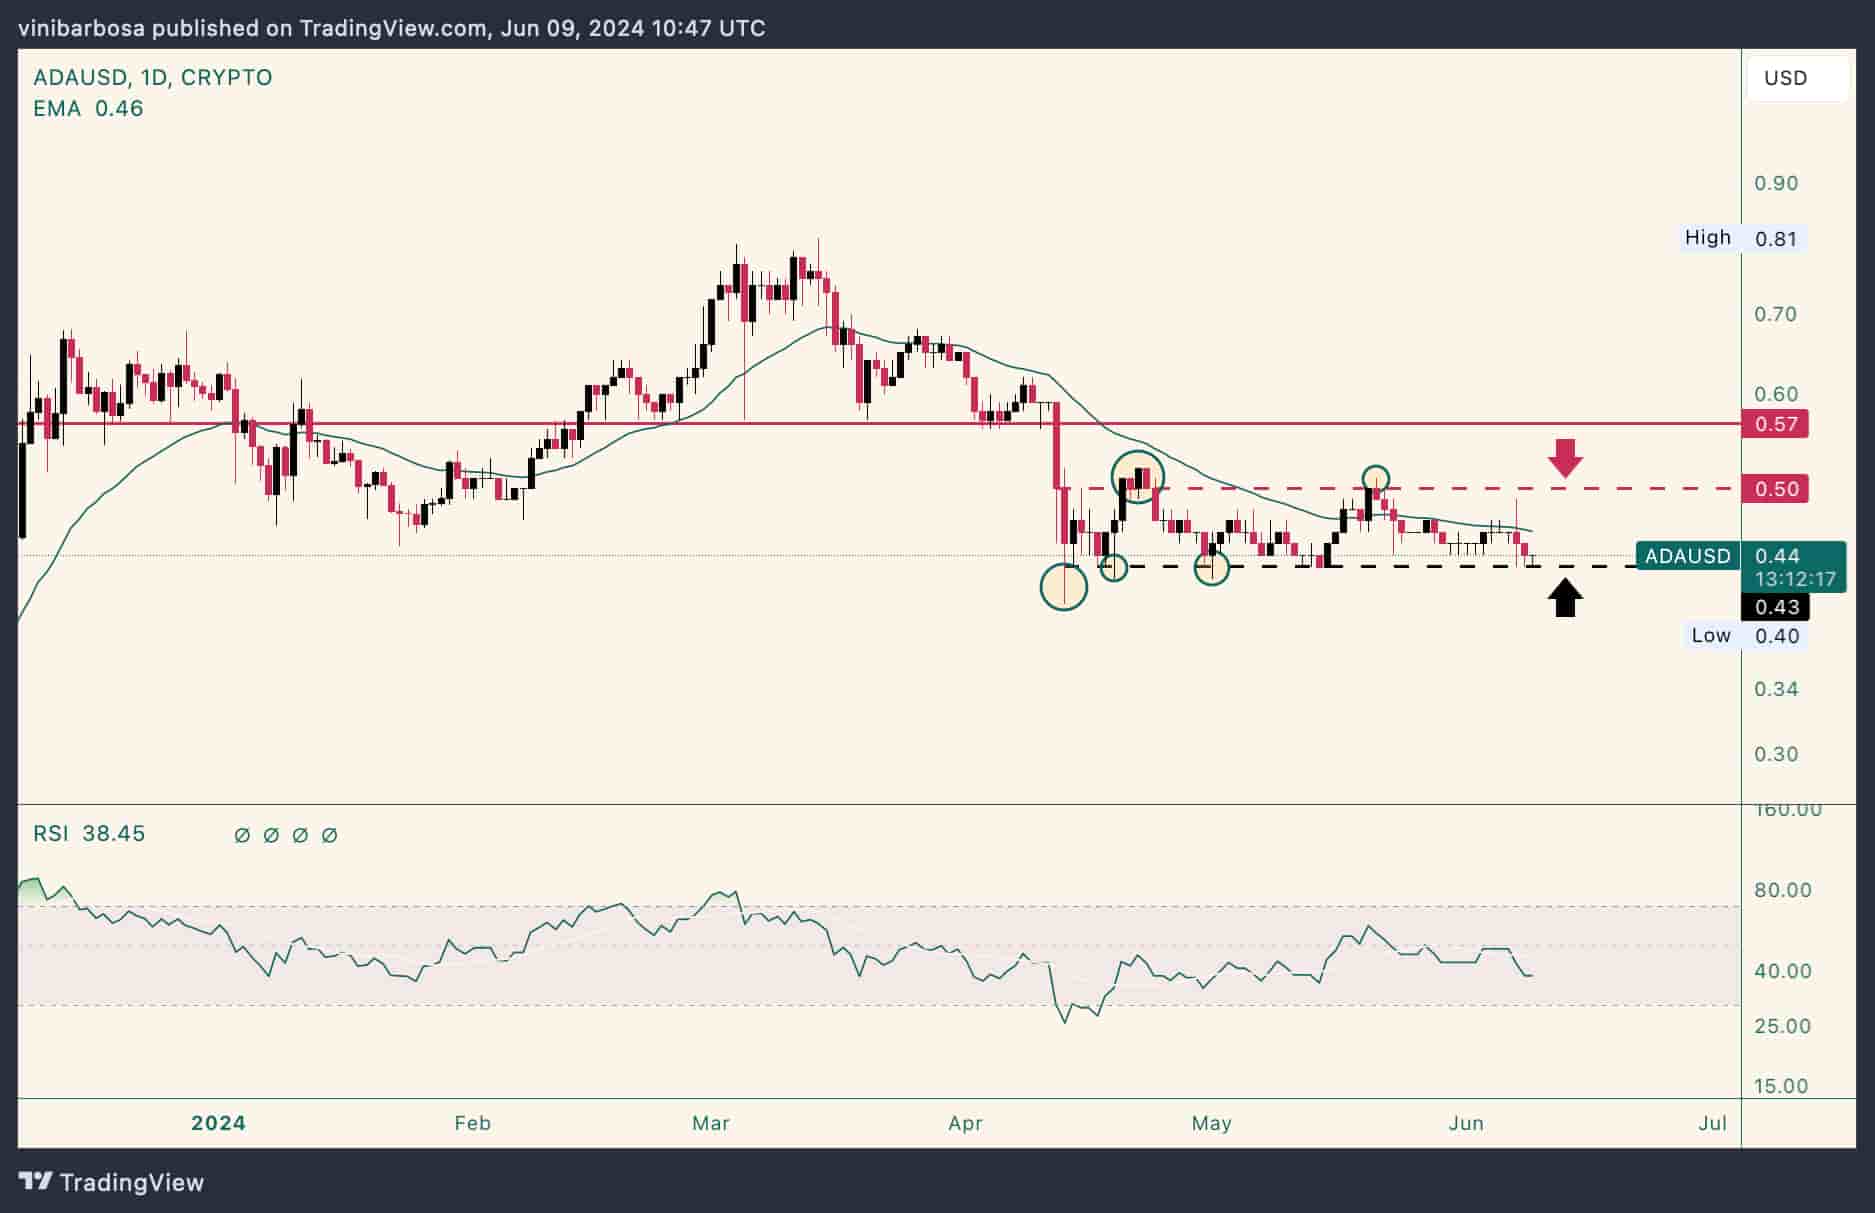 Breakout watch: Cardano key support and resistance levels for this week